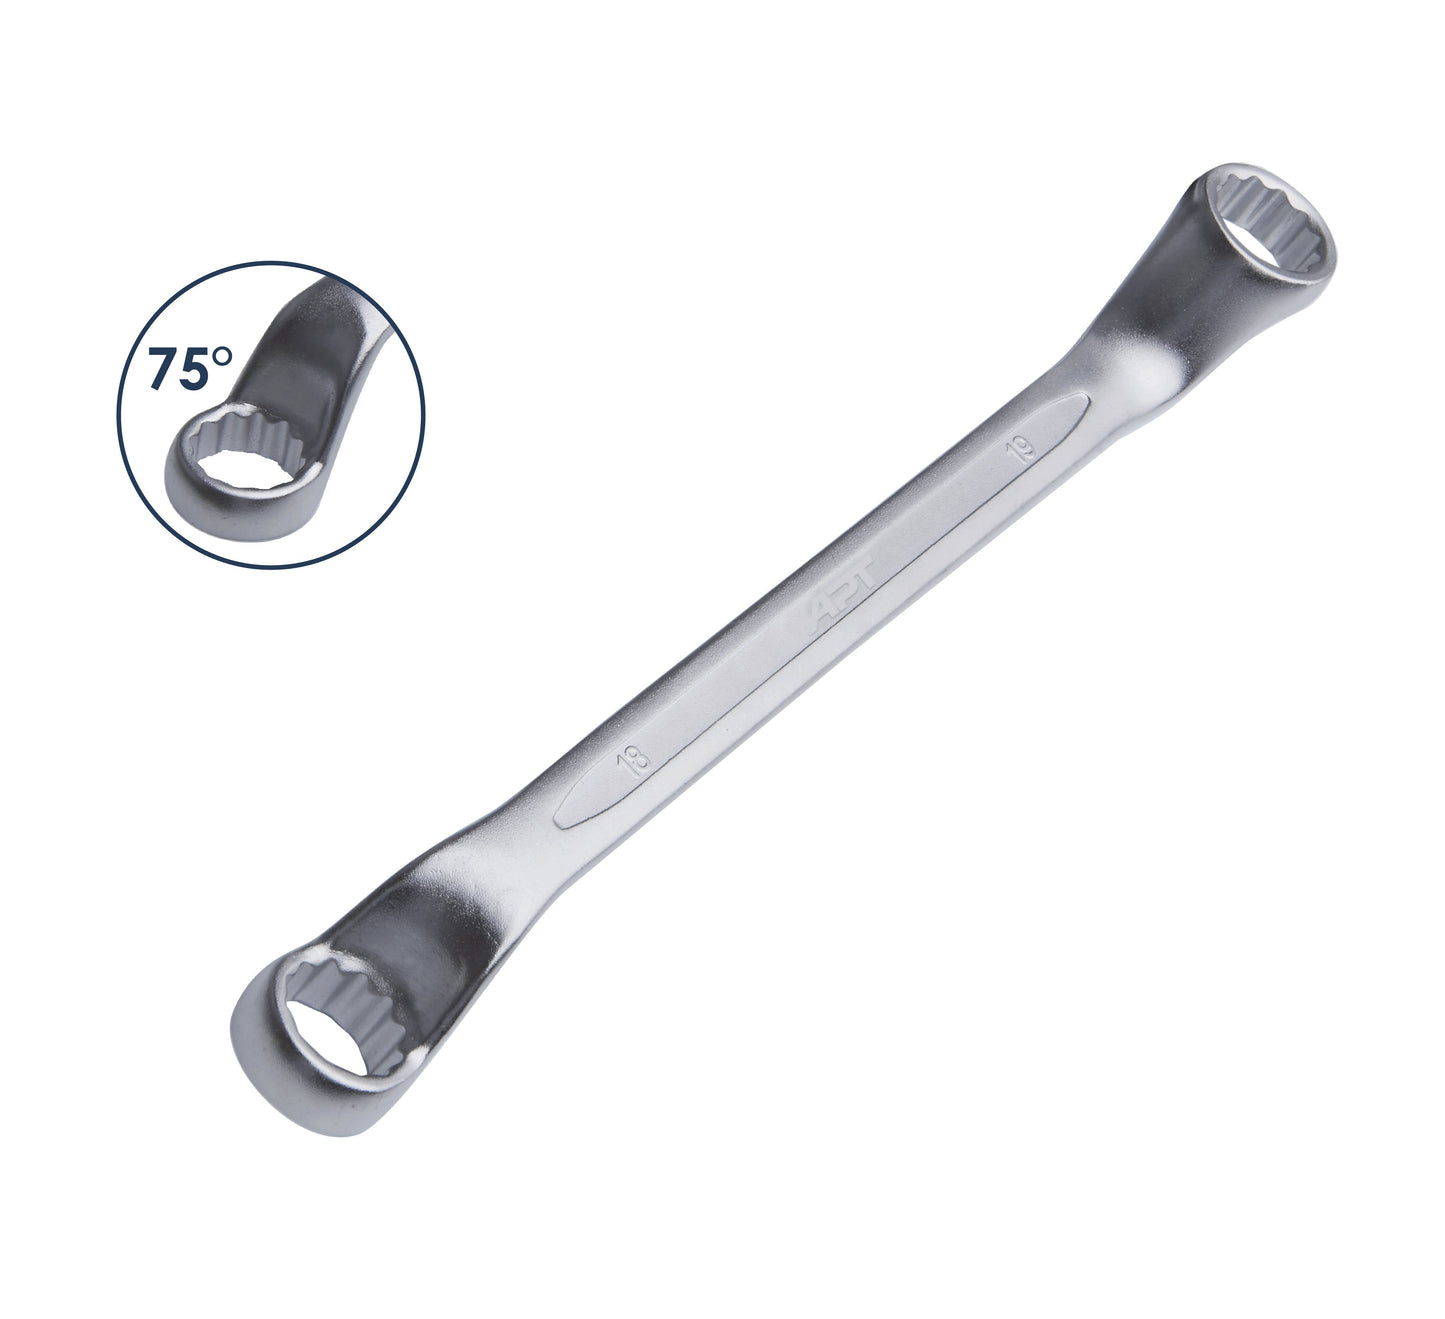 APT DOUBLE DEEP OFFSET RING WRENCH BRIGHT SATIN FINISH PP CARD HOLDER CR-V 08X09MM-AH211402-08X09